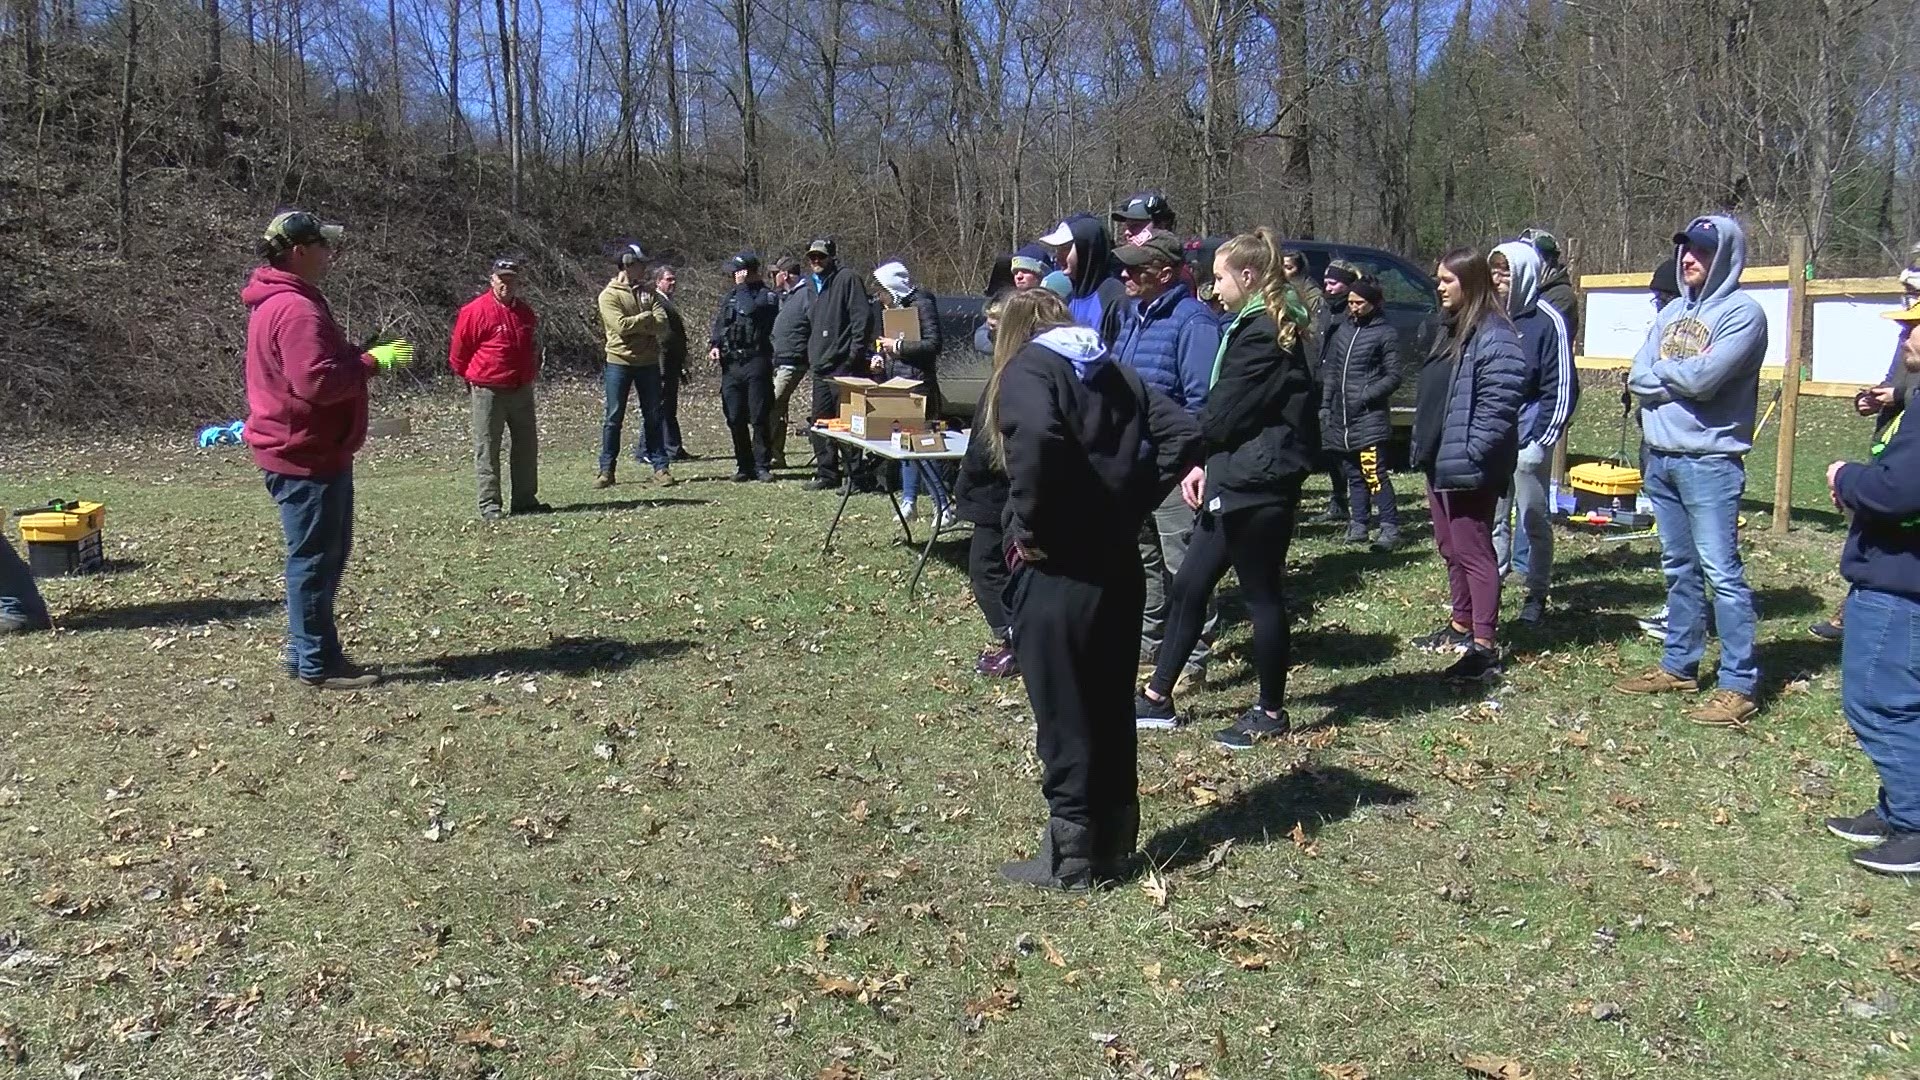 About two dozen students participated in the class where they learned about the different types of weapons and ammunition they might encounter in an investigation.